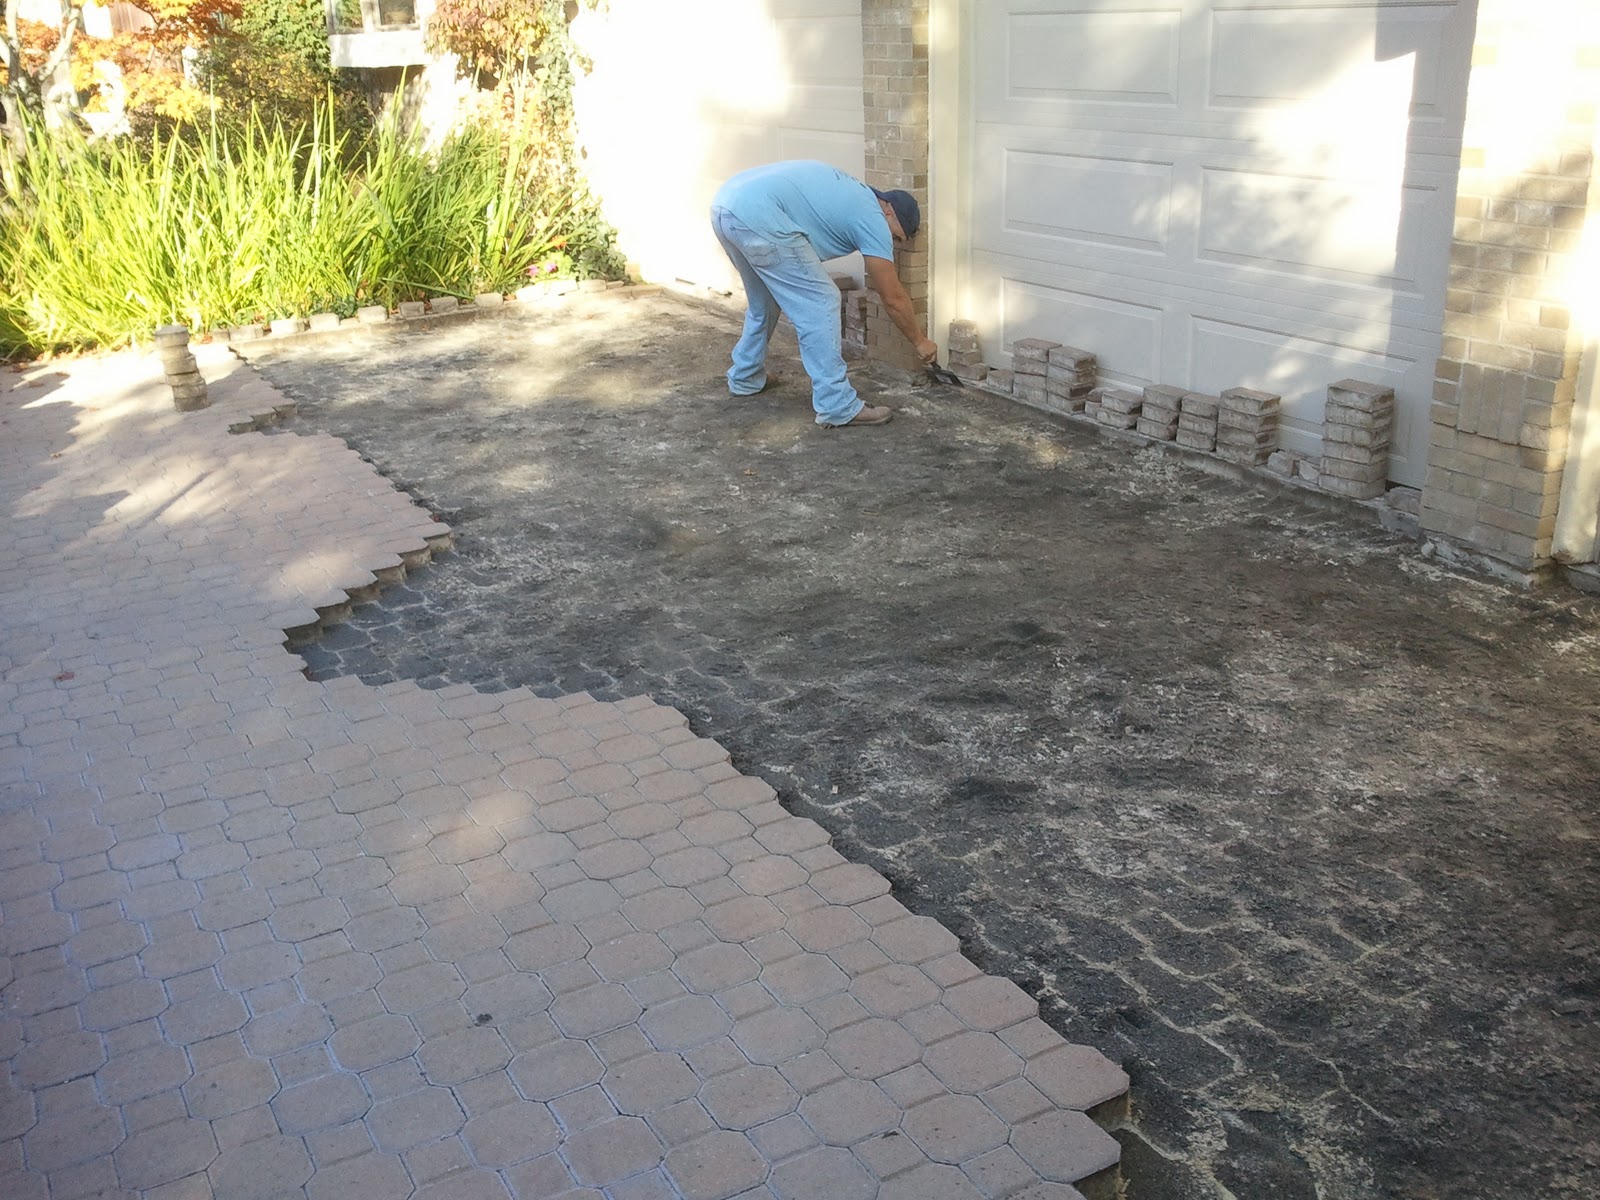 ... foundation for patio pavers. charming patio design with laying pavers